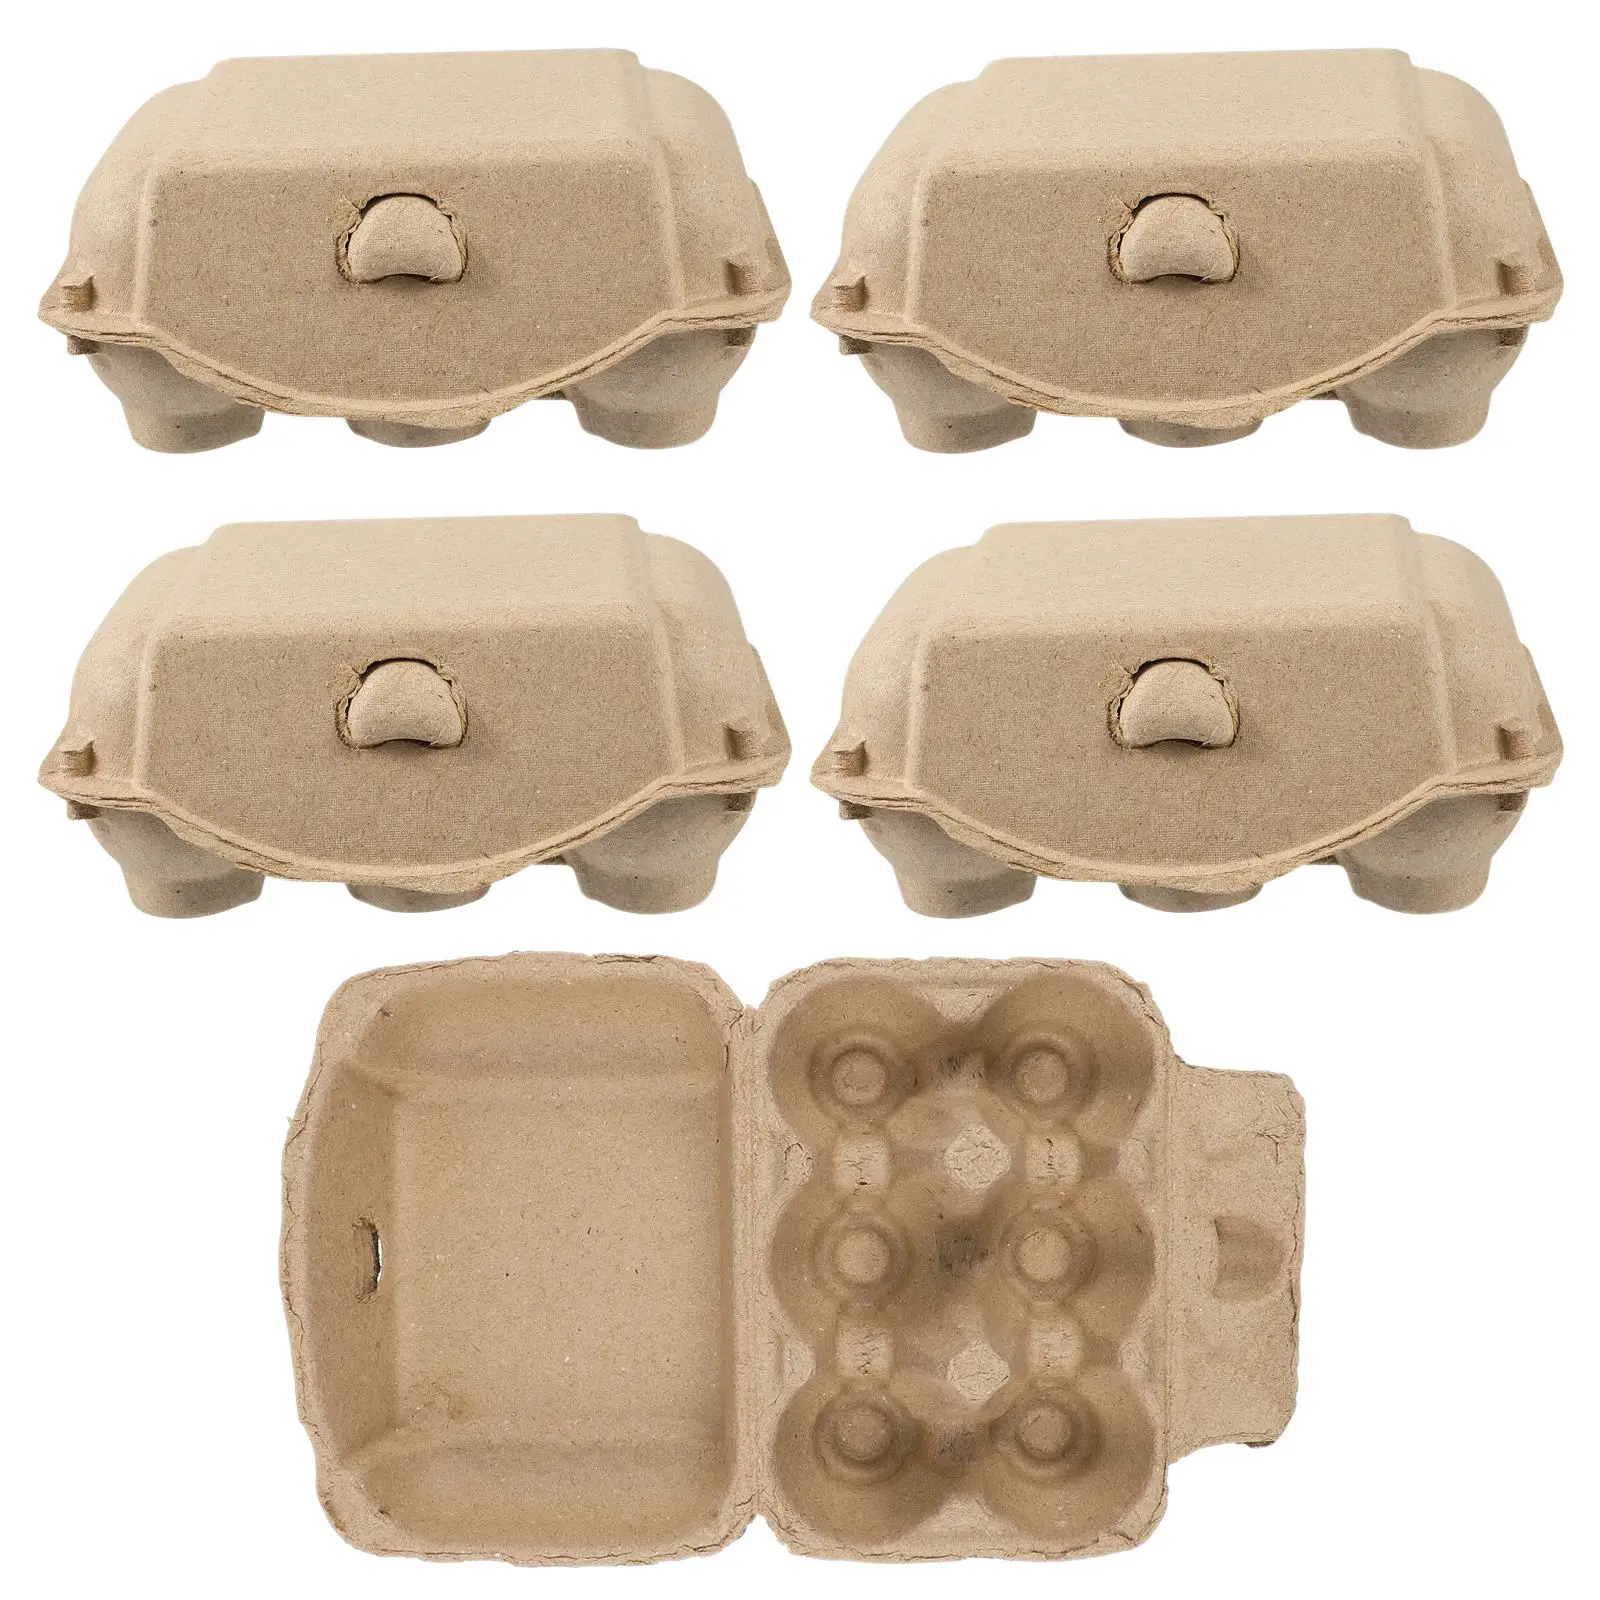 

5pcs 6 Grid Eggs Holder Paper Pulp Egg Cartons Egg Storage Trays Containers Chicken Farm Equipment Kitchen Organizer